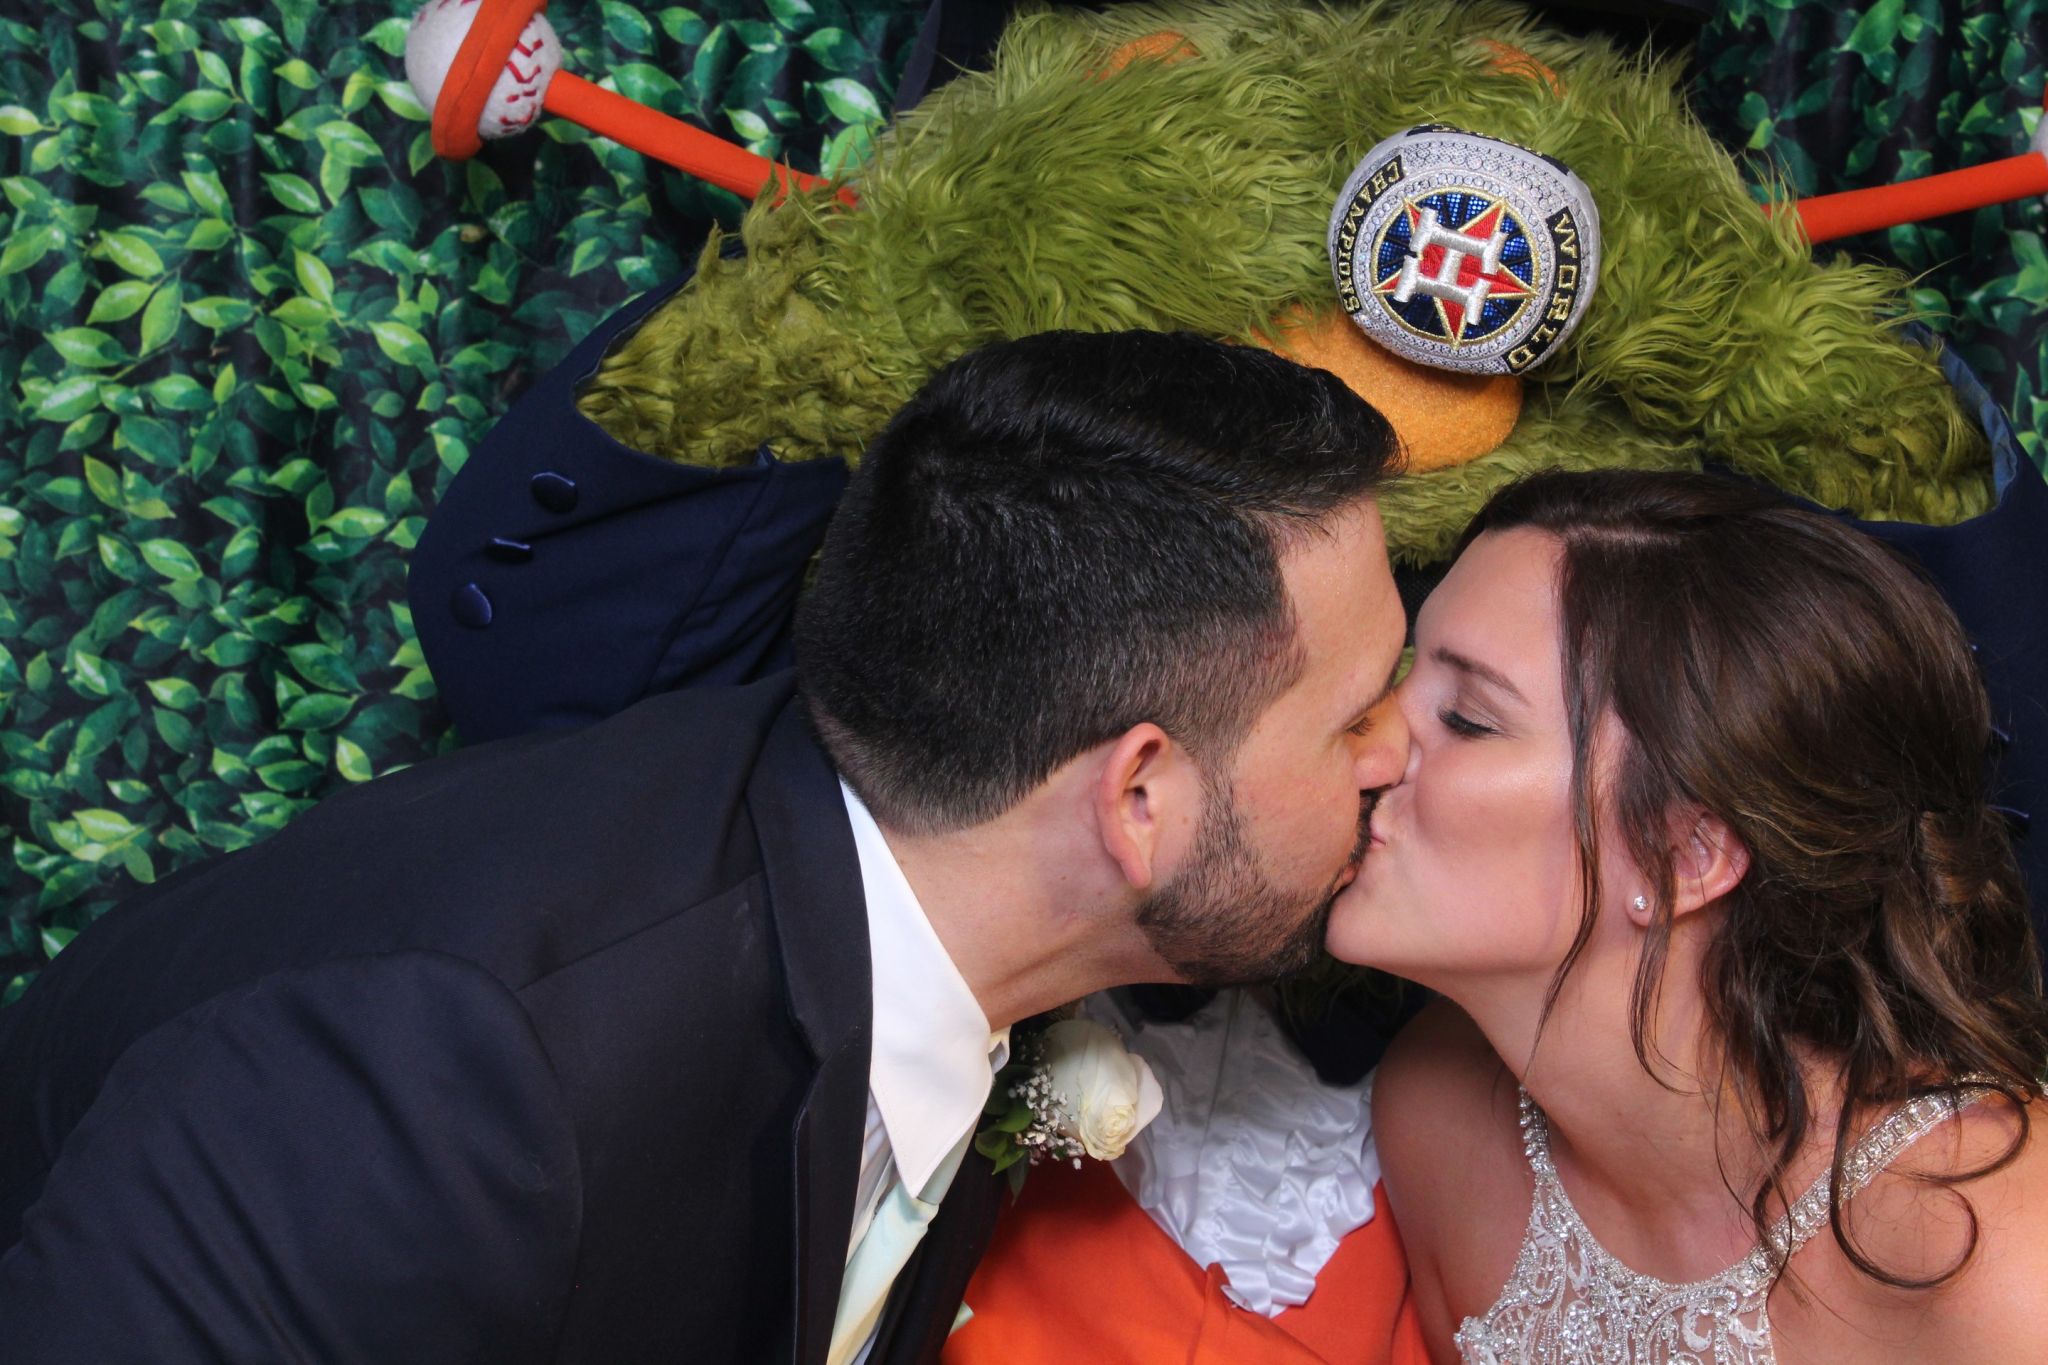 Crushing on Orbit — Why I Want to Marry the Houston Astros' Green